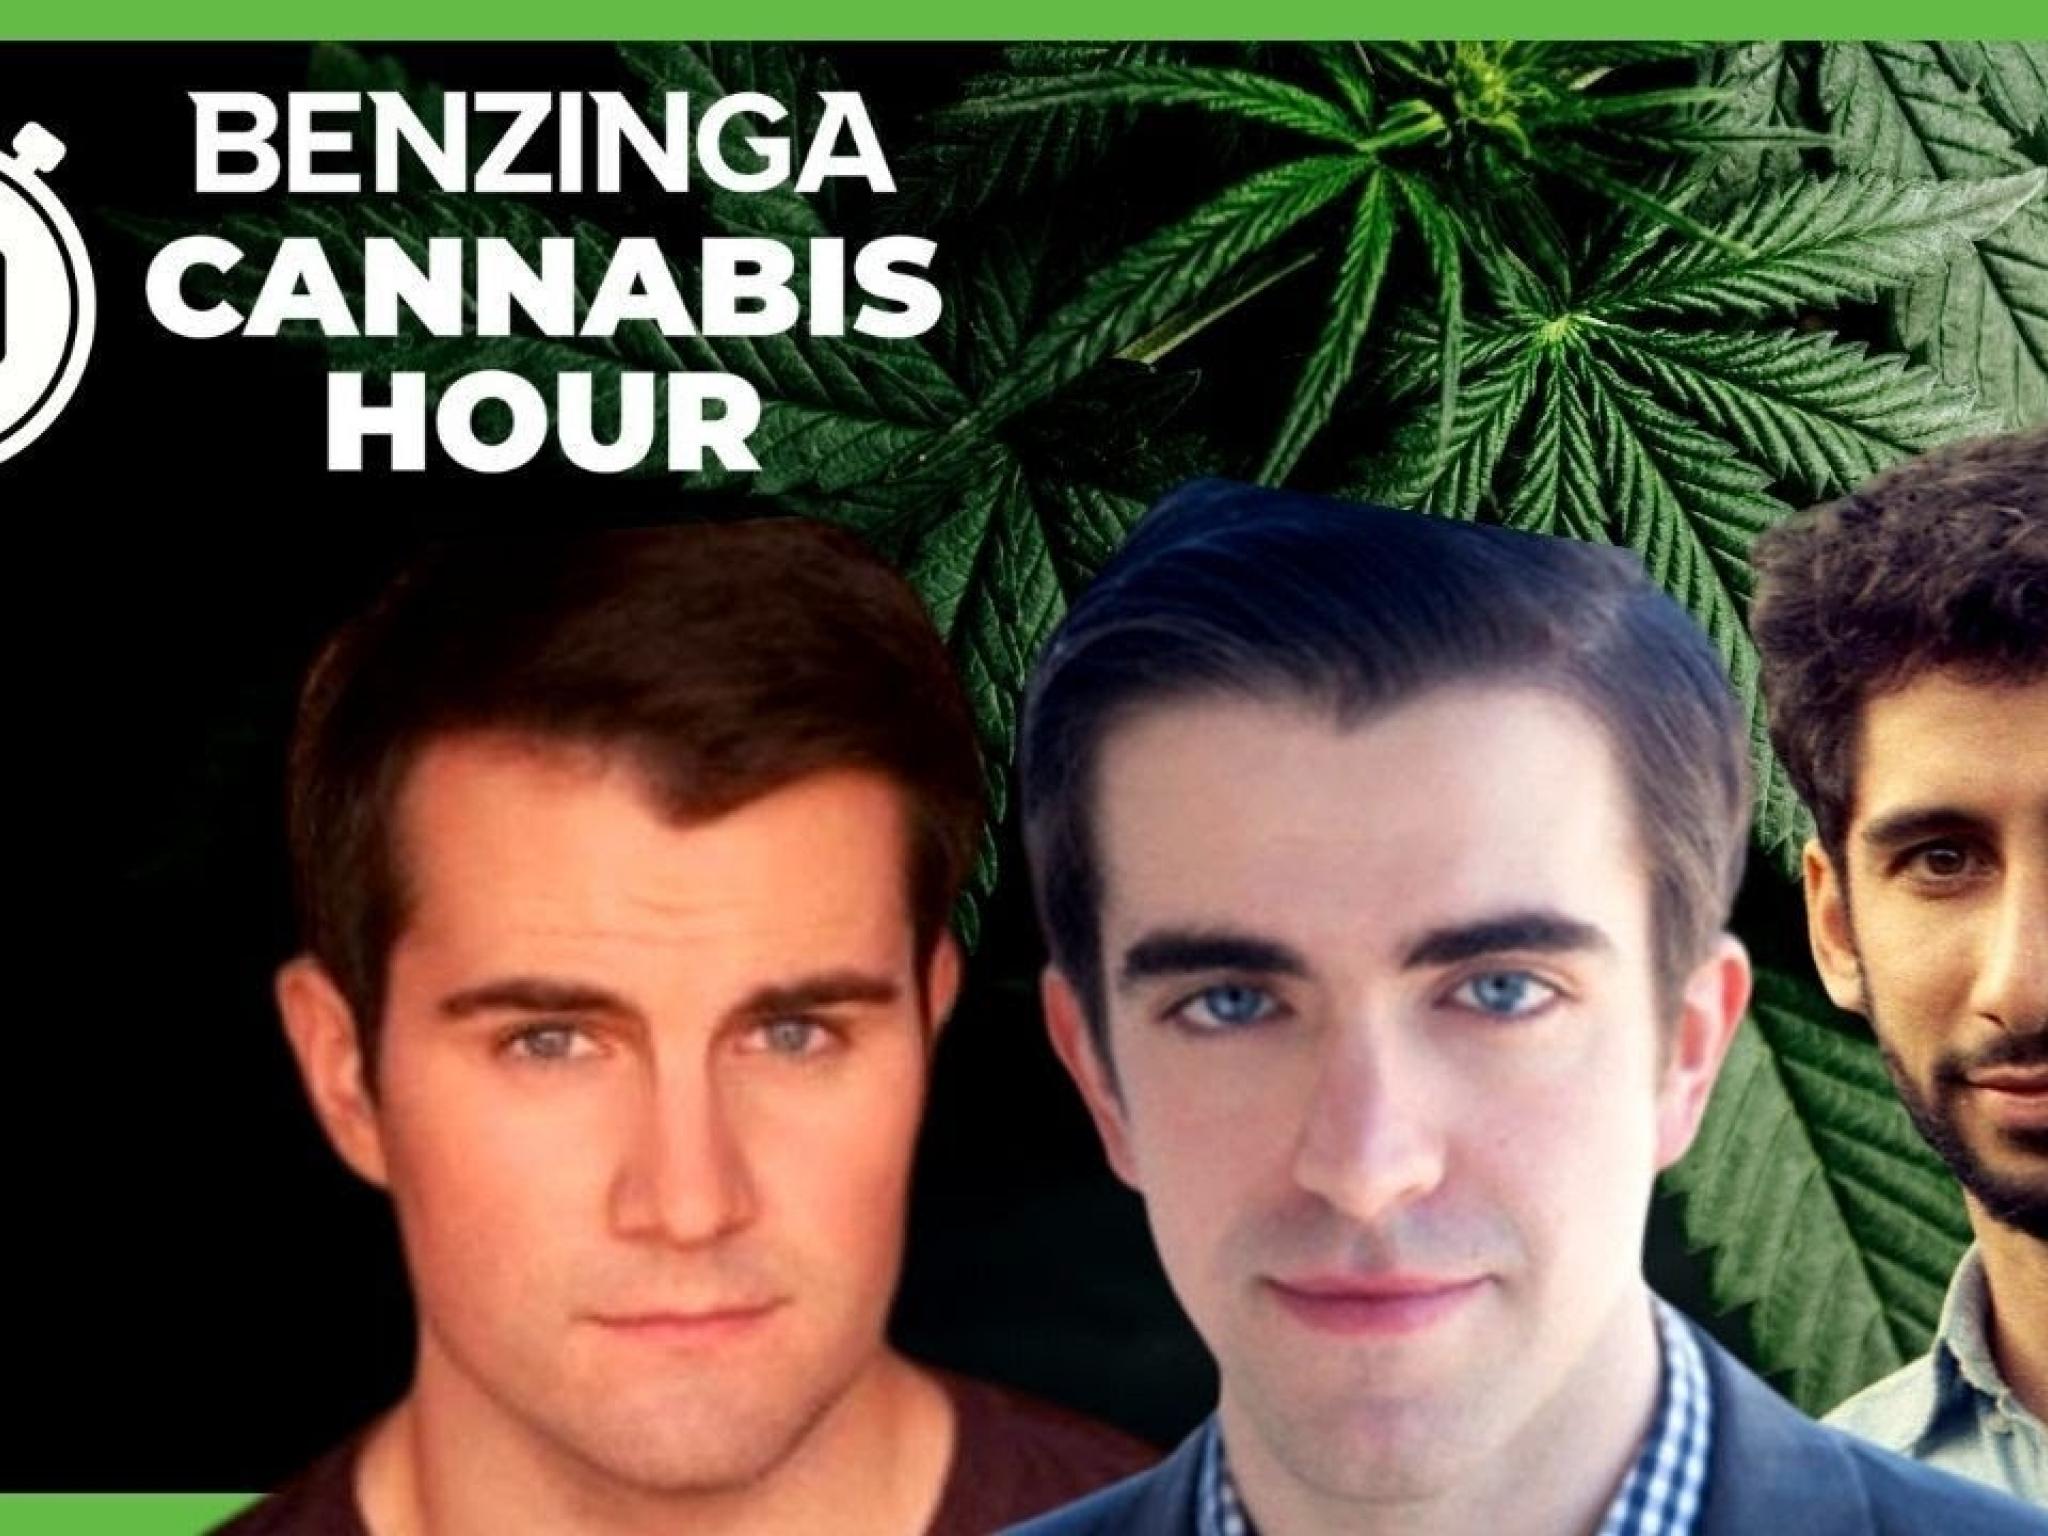  discussing-the-schumer-bill-with-nextleafs-ceo-at-the-benzinga-cannabis-hour 